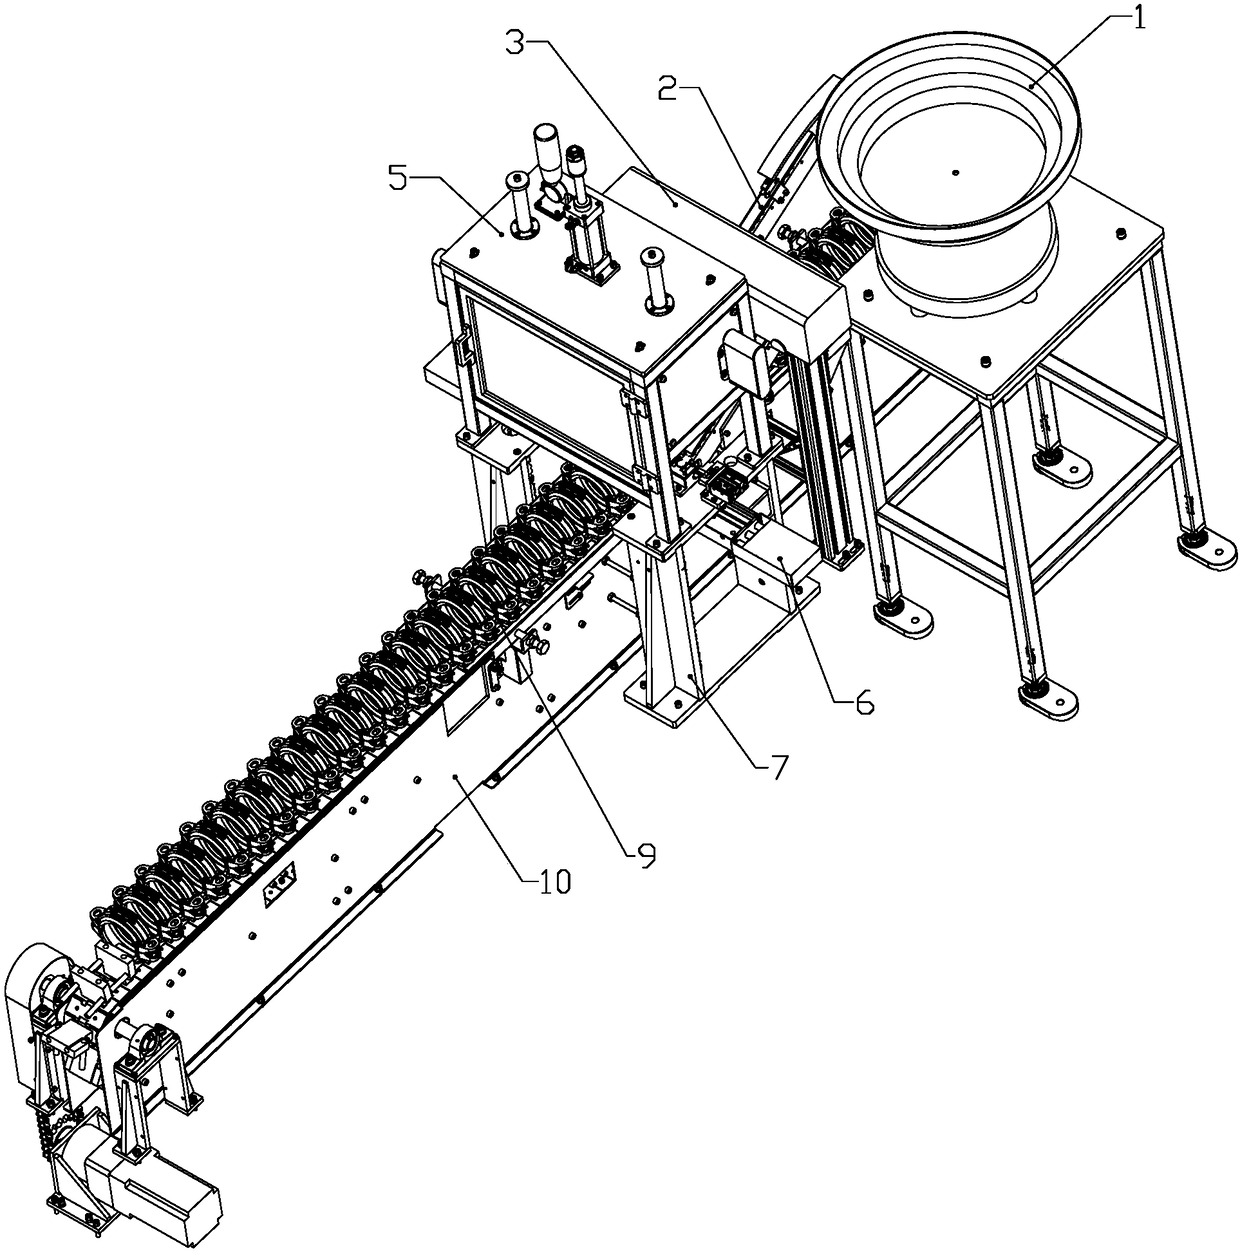 Automatic bolt distributing and feeding mechanism